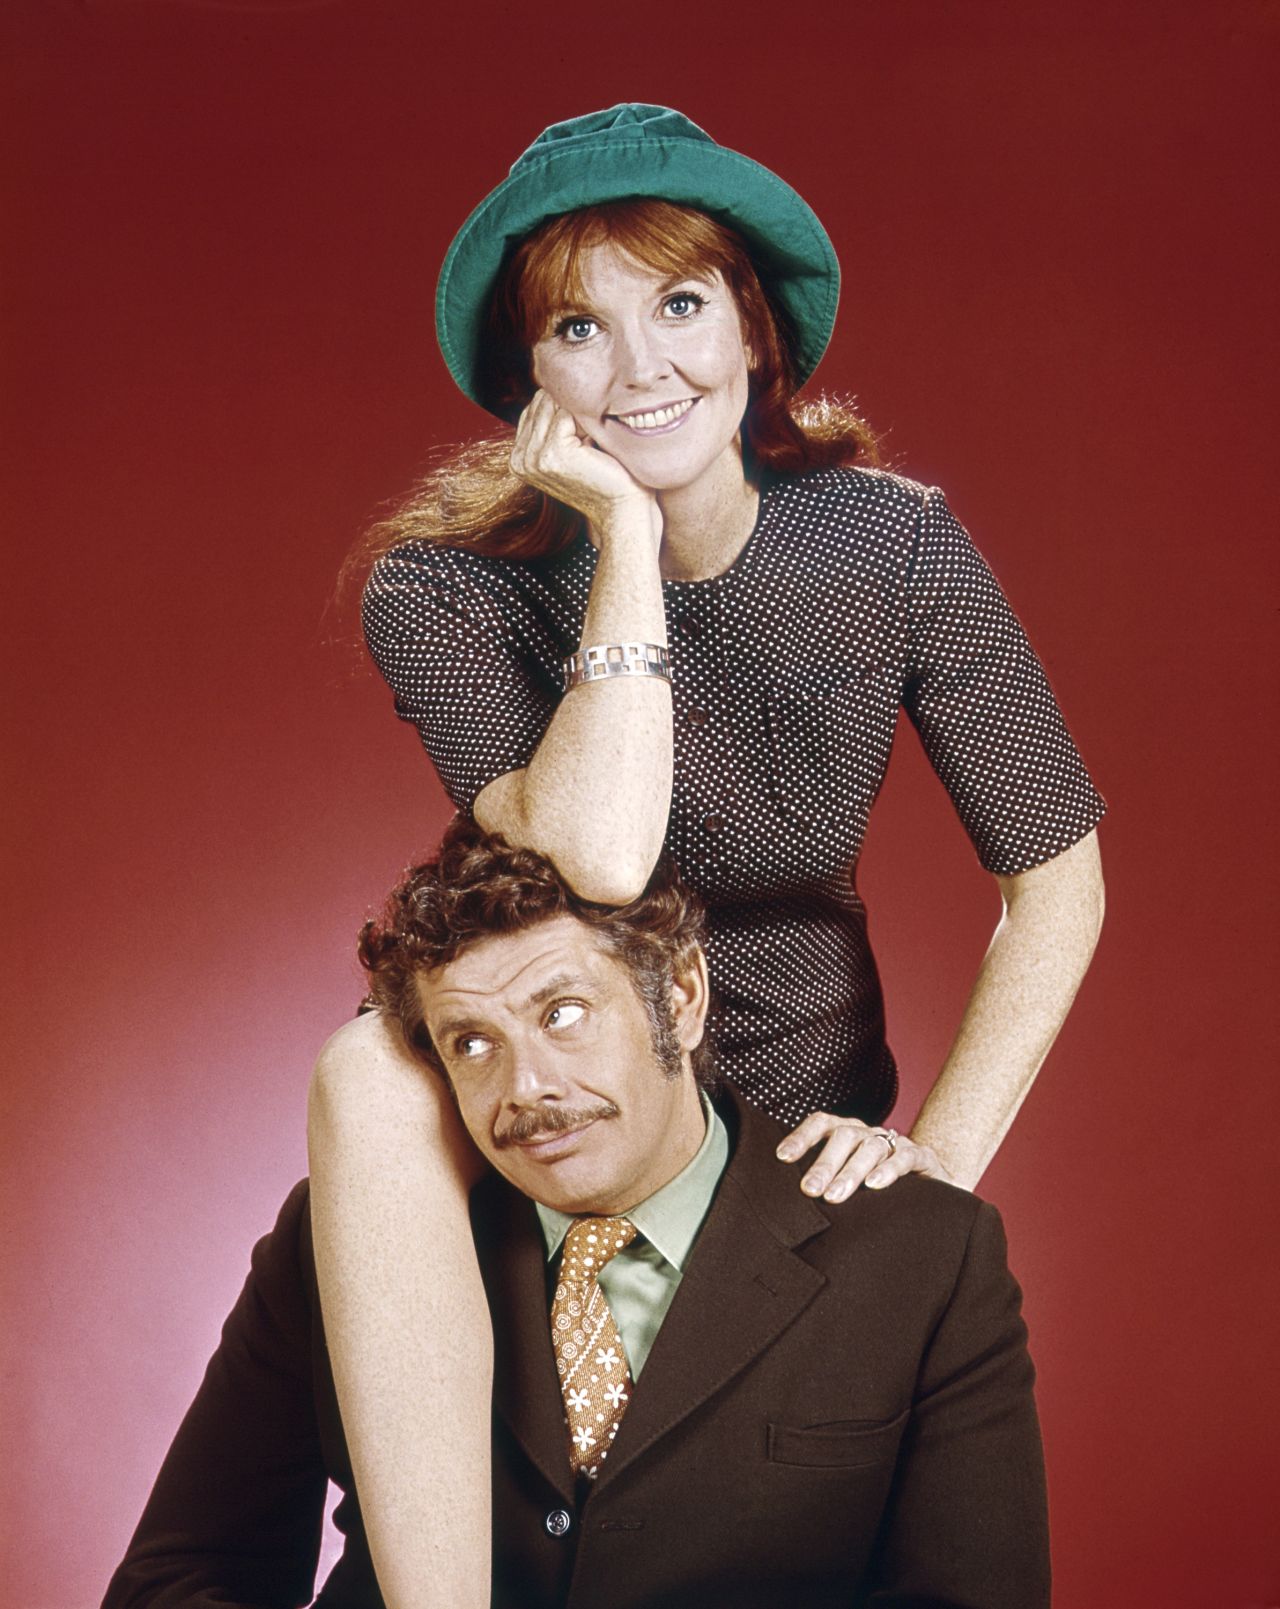 Stiller and Meara often joked about their differences -— him a short Jewish man and her a tall Irish Catholic woman.